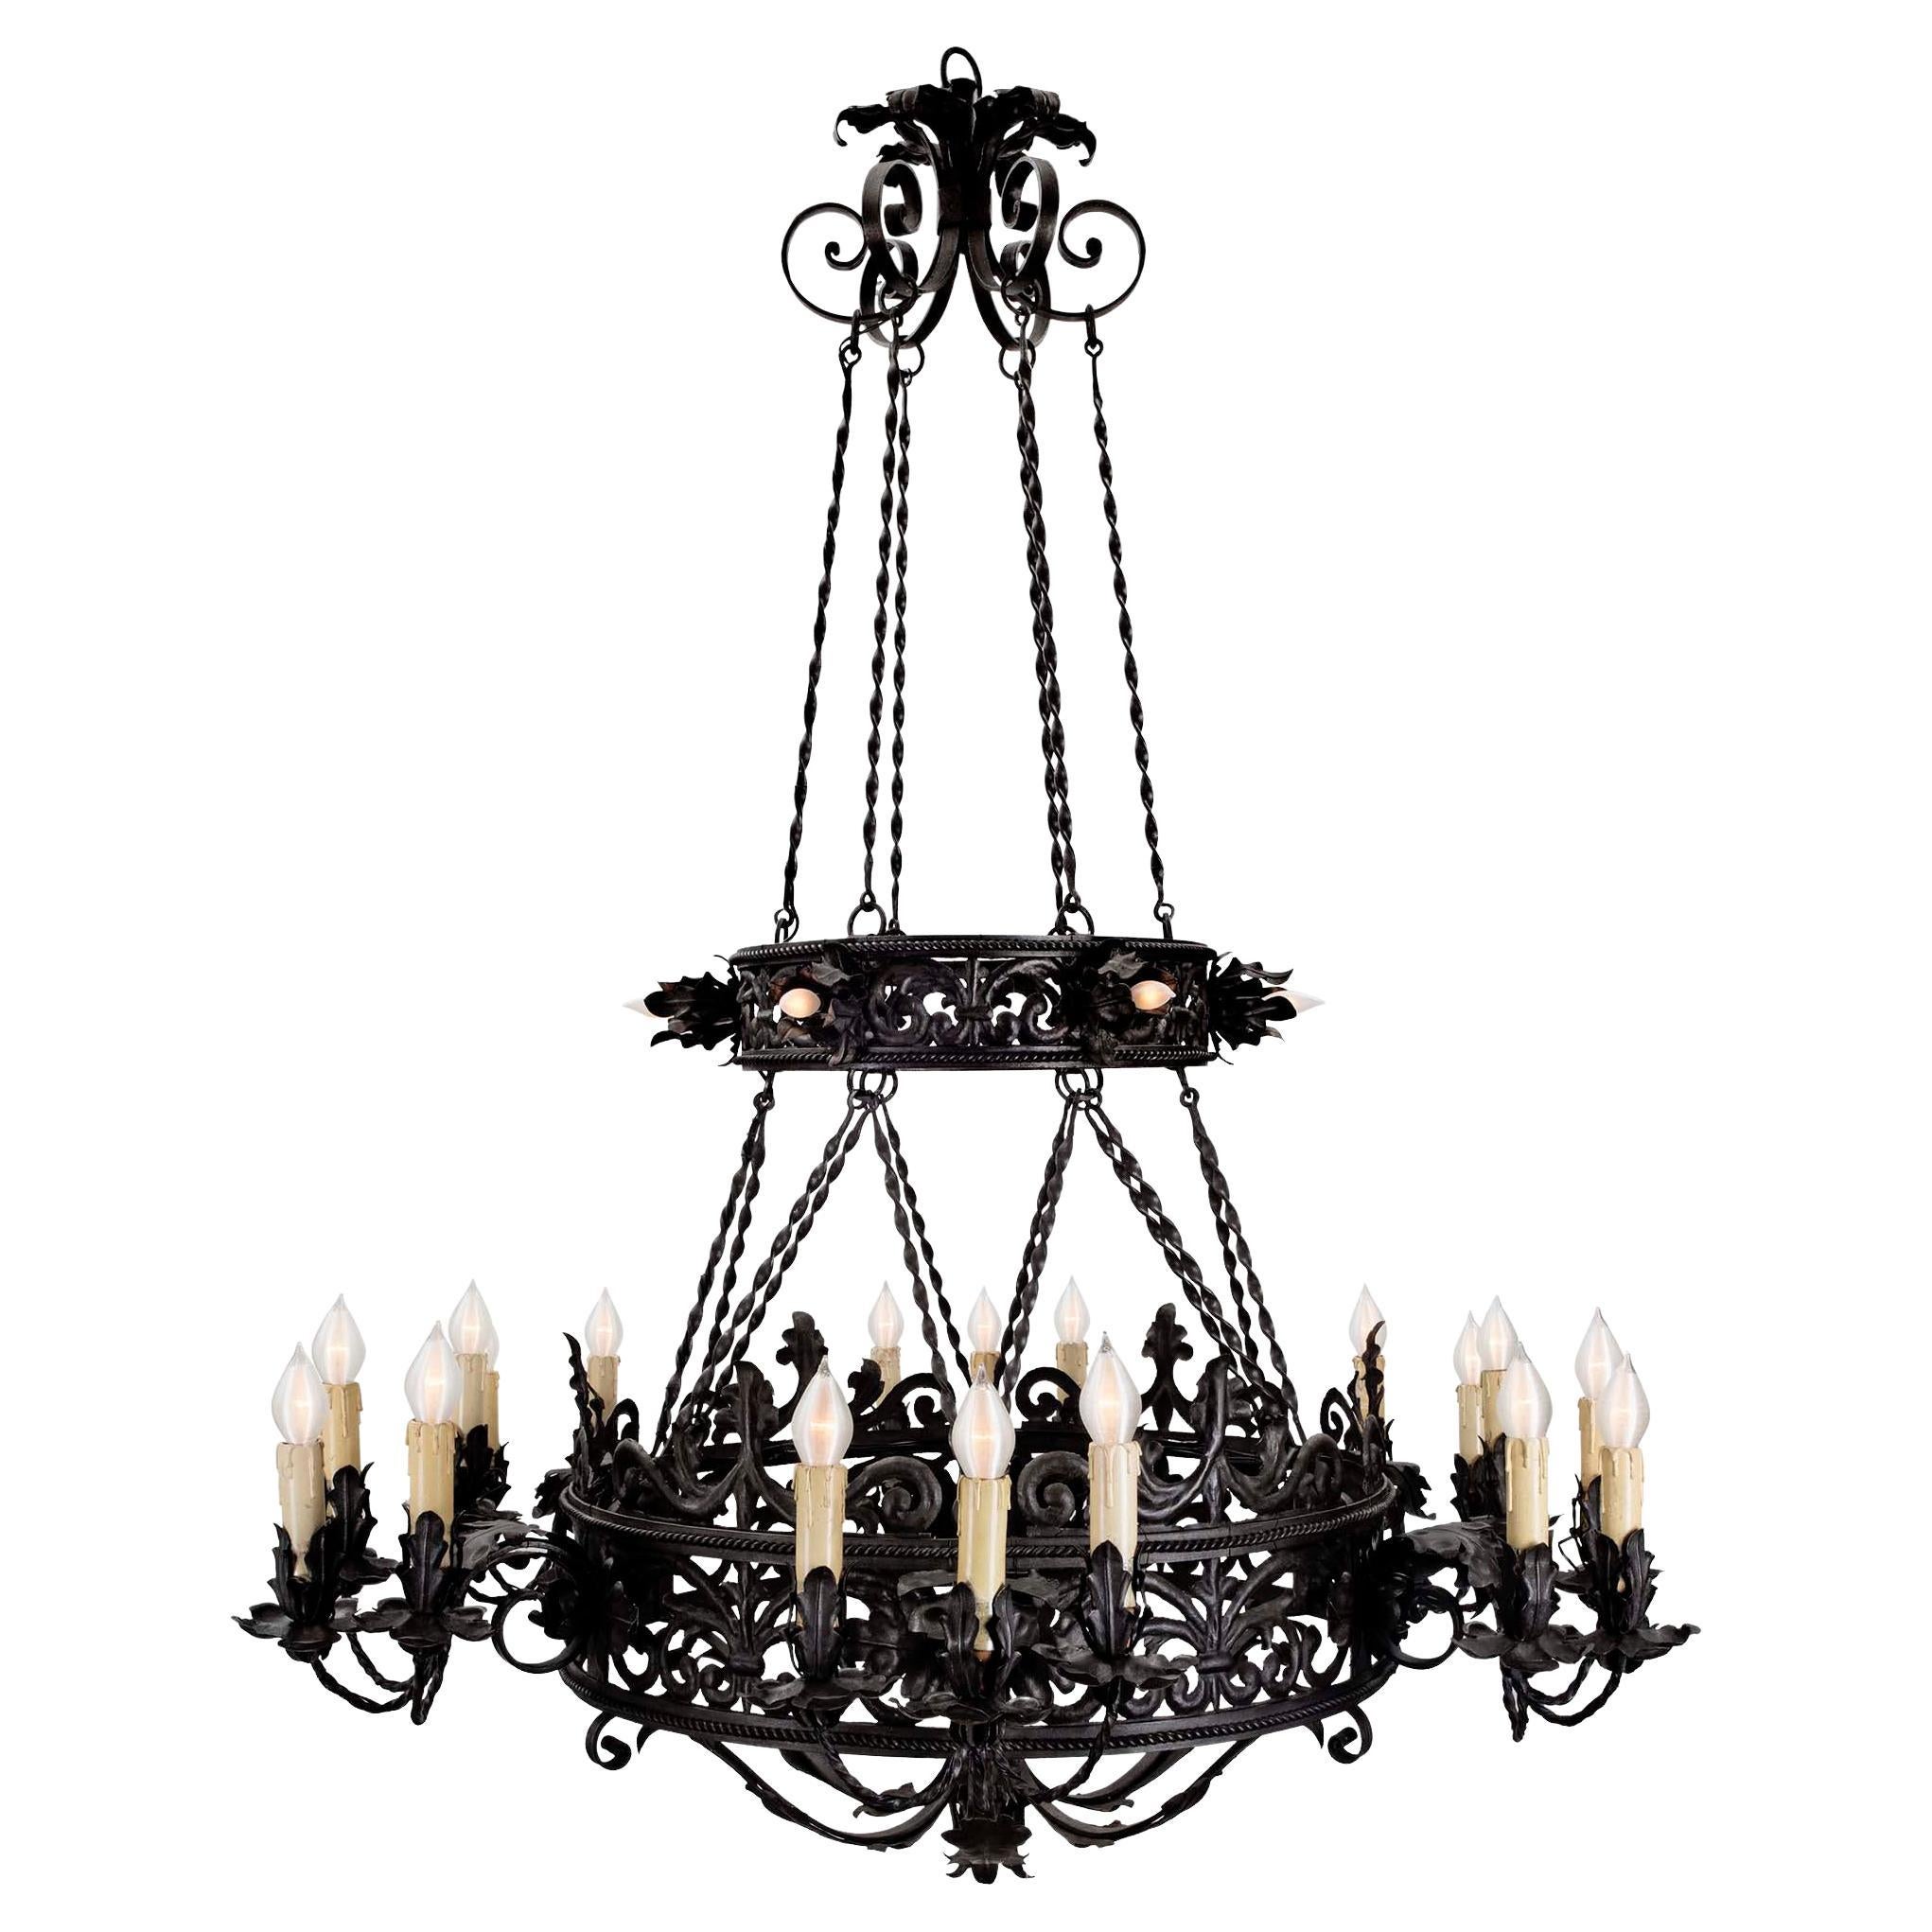 French Mid 19th Century Patinated Wrought Iron 24 Light Chandelier